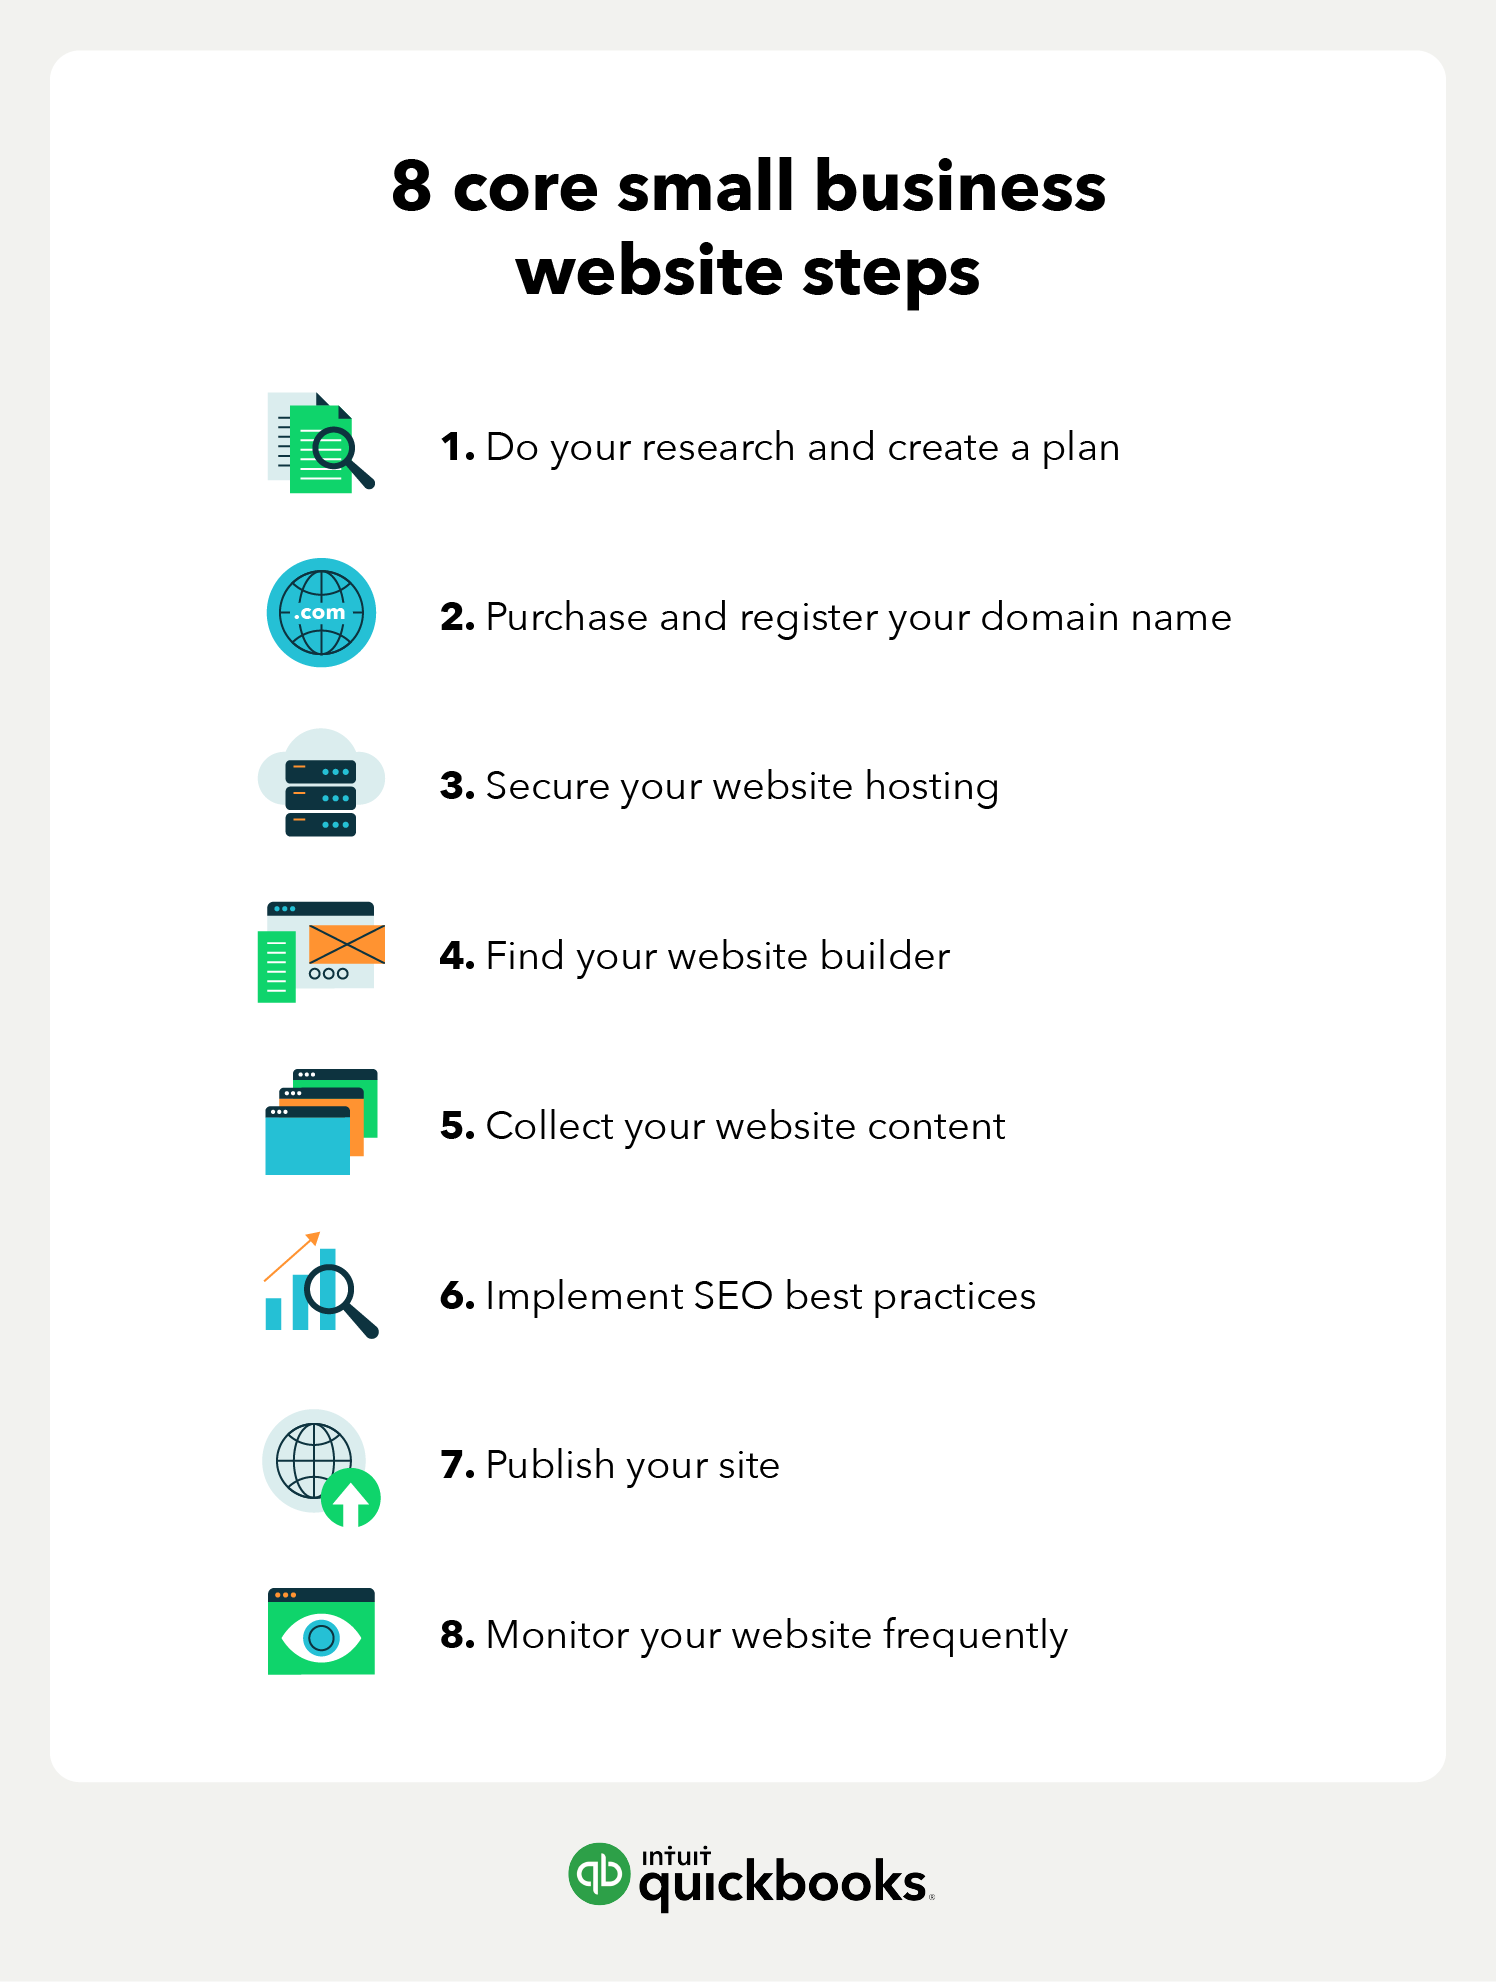 8 small business website steps